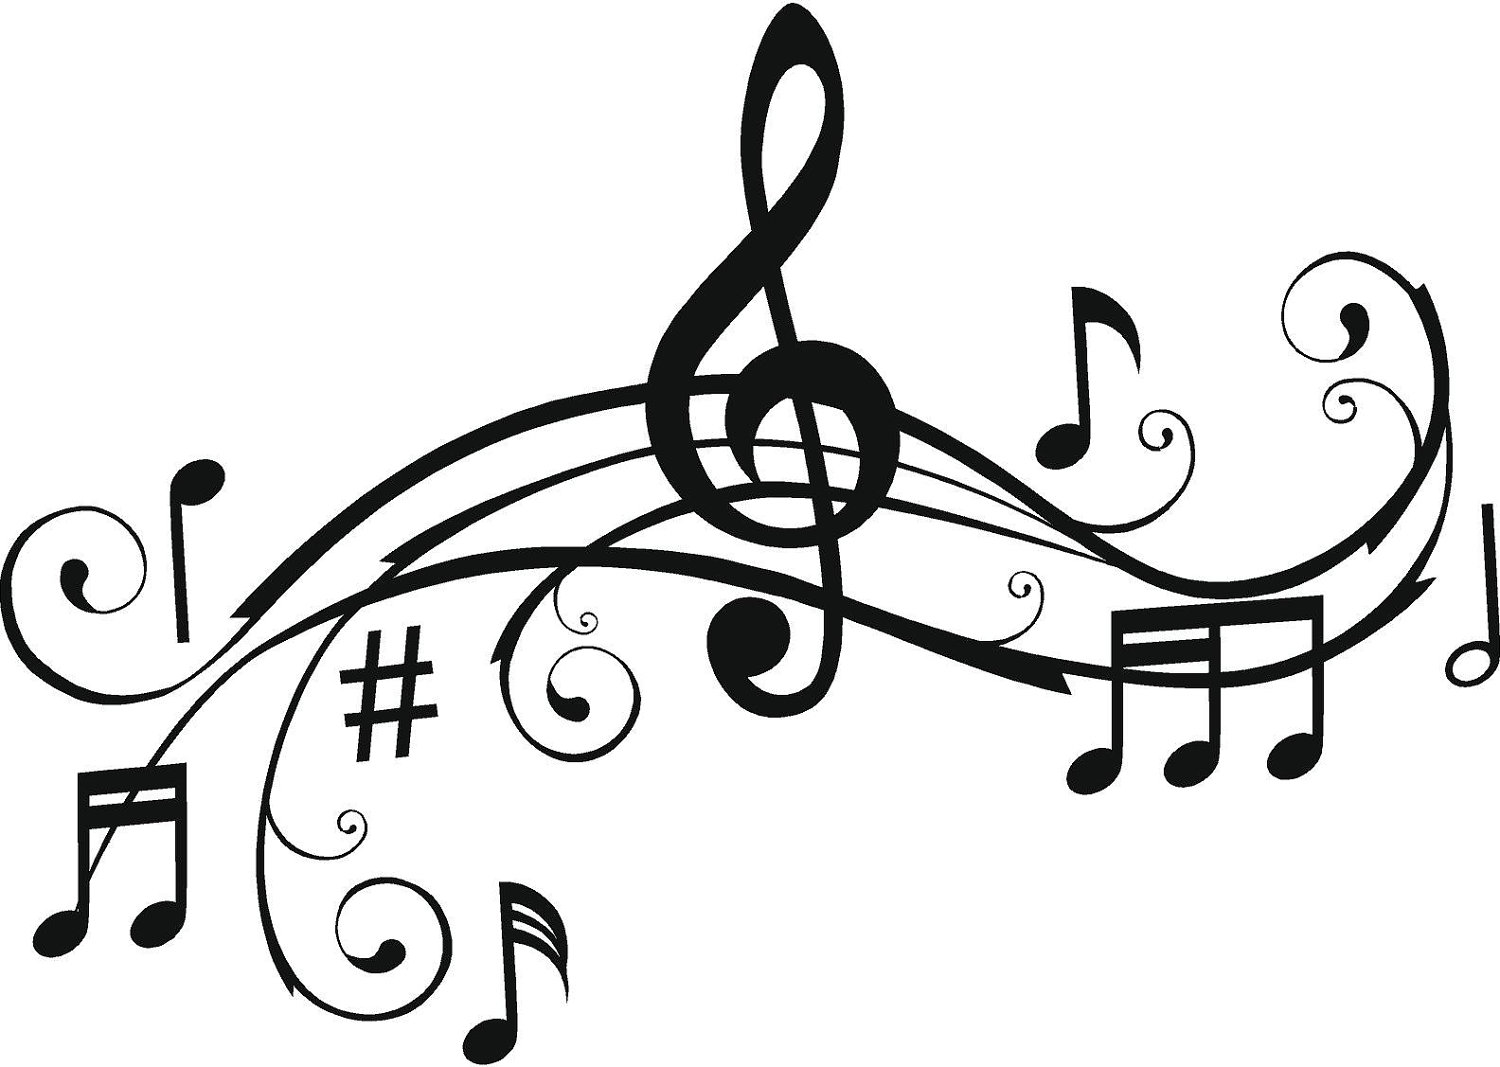 Music images clipart